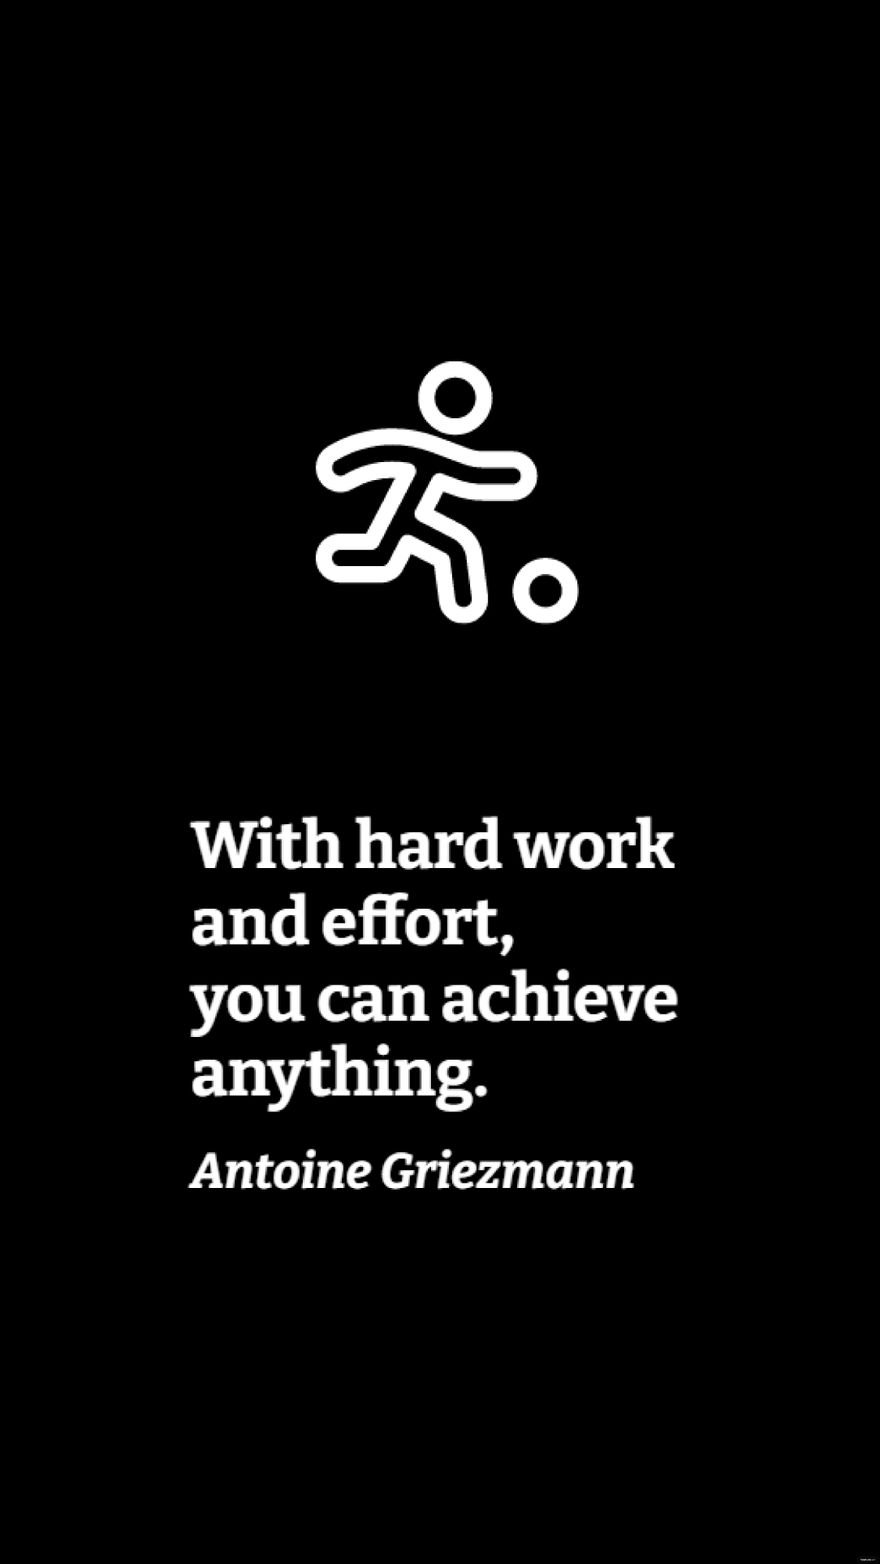 Free Antoine Griezmann - With hard work and effort, you can achieve anything. in JPG